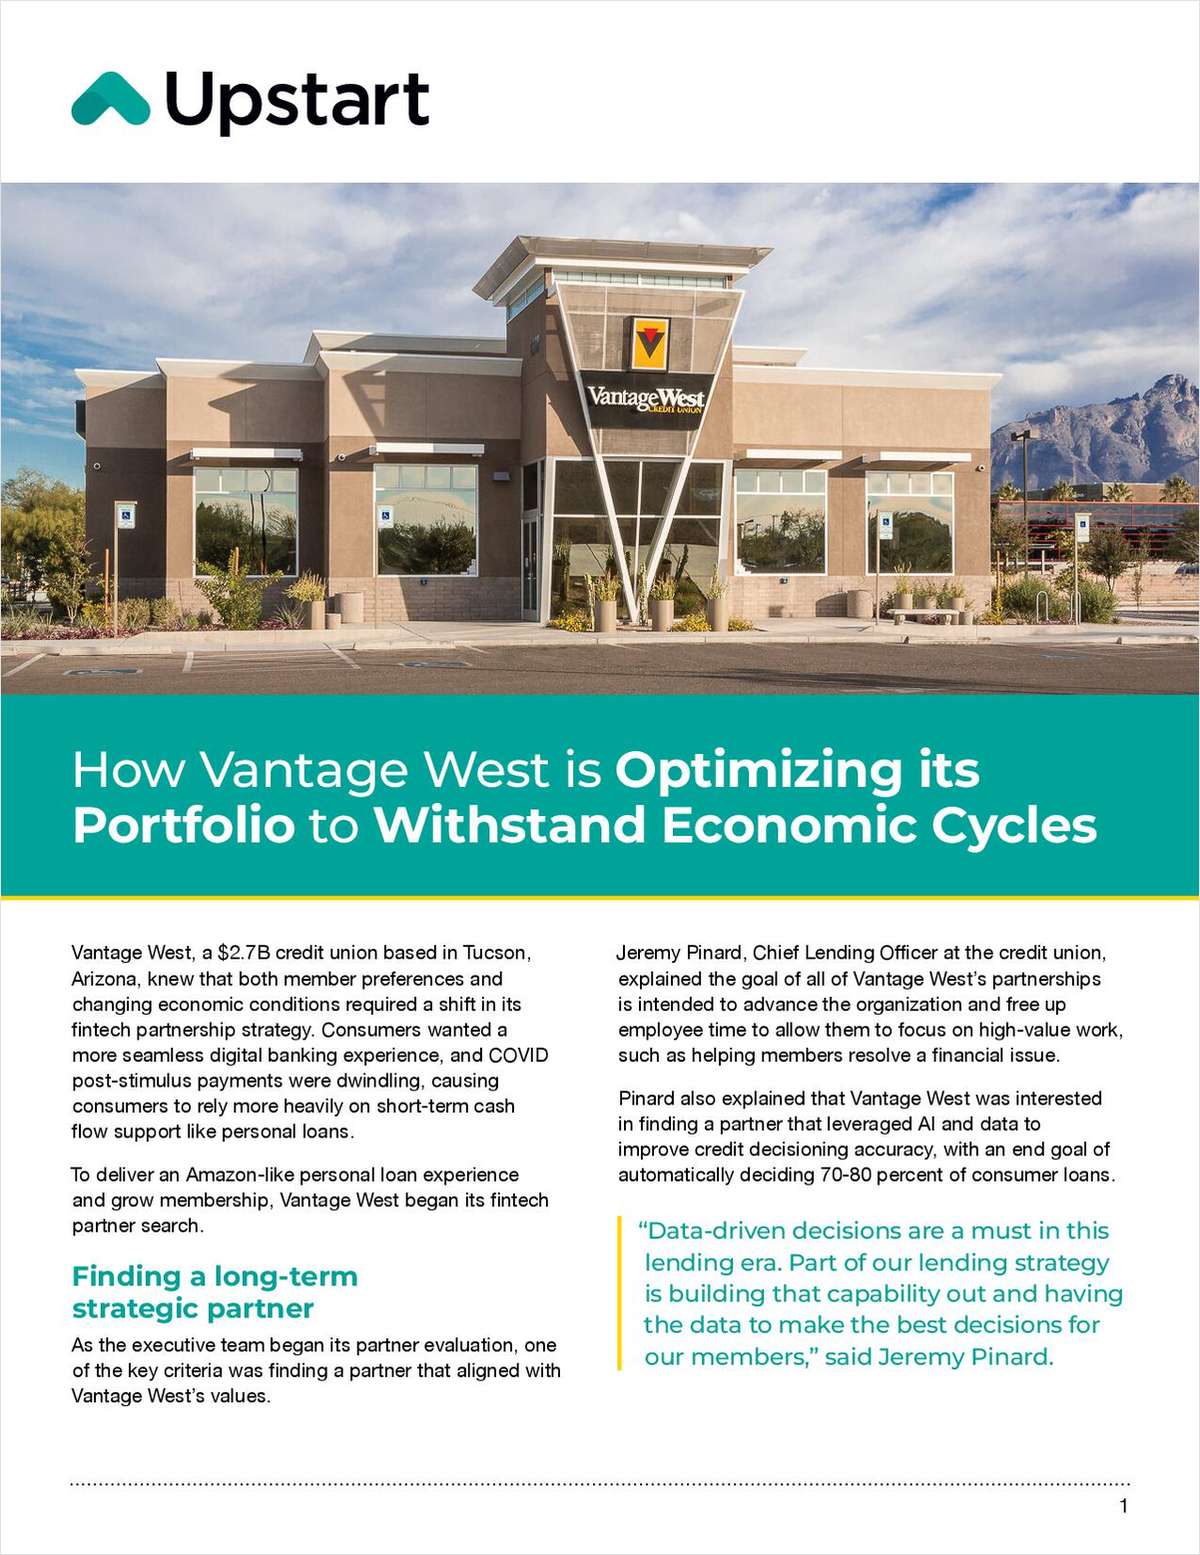 How Vantage West is Optimizing Its Portfolio To Withstand Economic Cycles